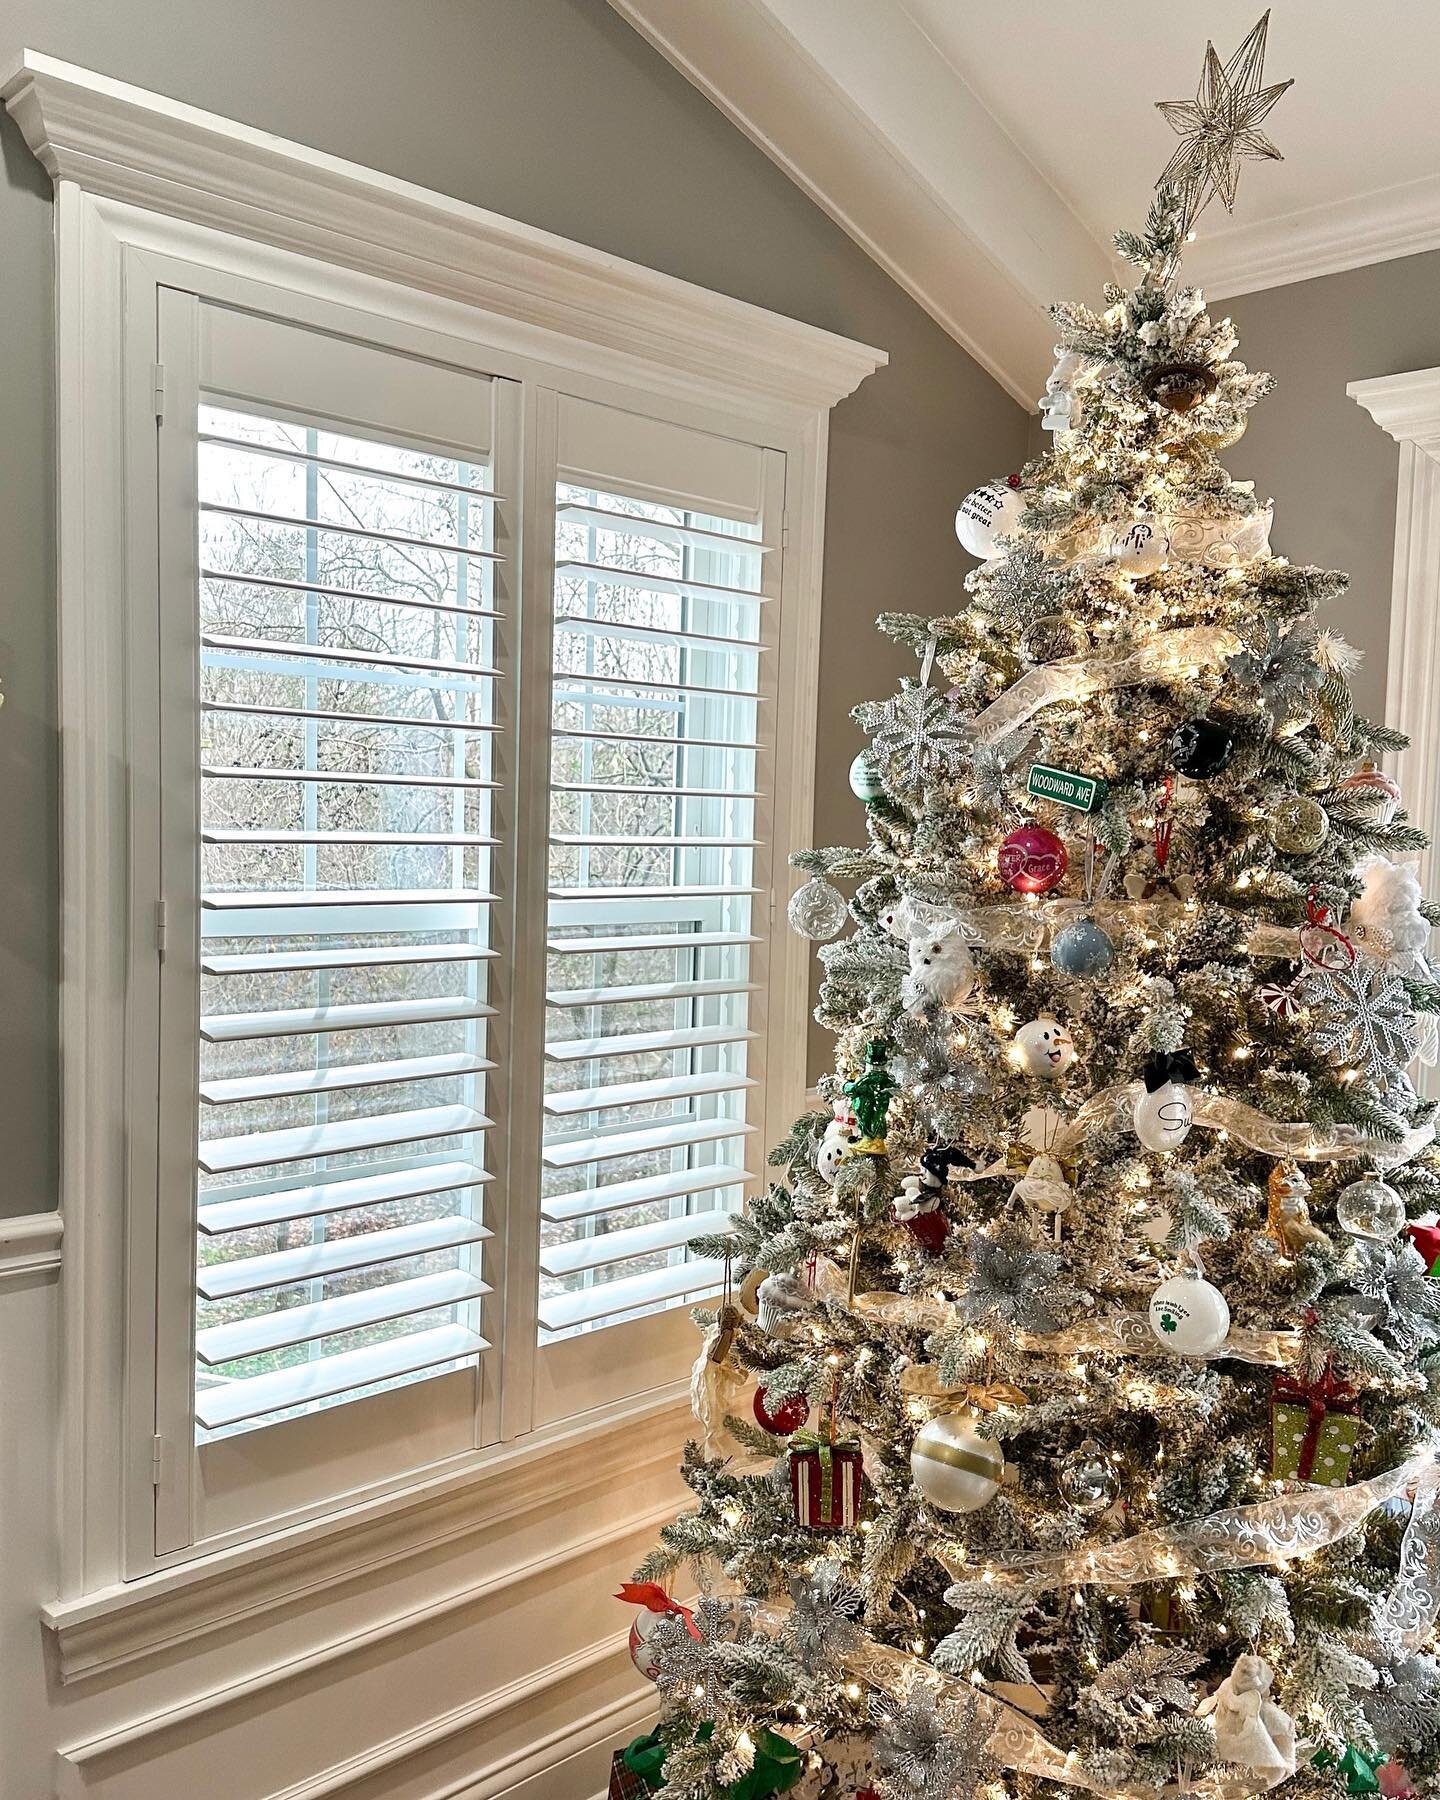 Let it snow, let it glow! Our white shutters are stealing the spotlight by the Christmas tree!🎄🤍 Explore how our custom shutters can transform your home into a winter wonderland&mdash;with an extra special 20% off. But hurry, the festivities end on